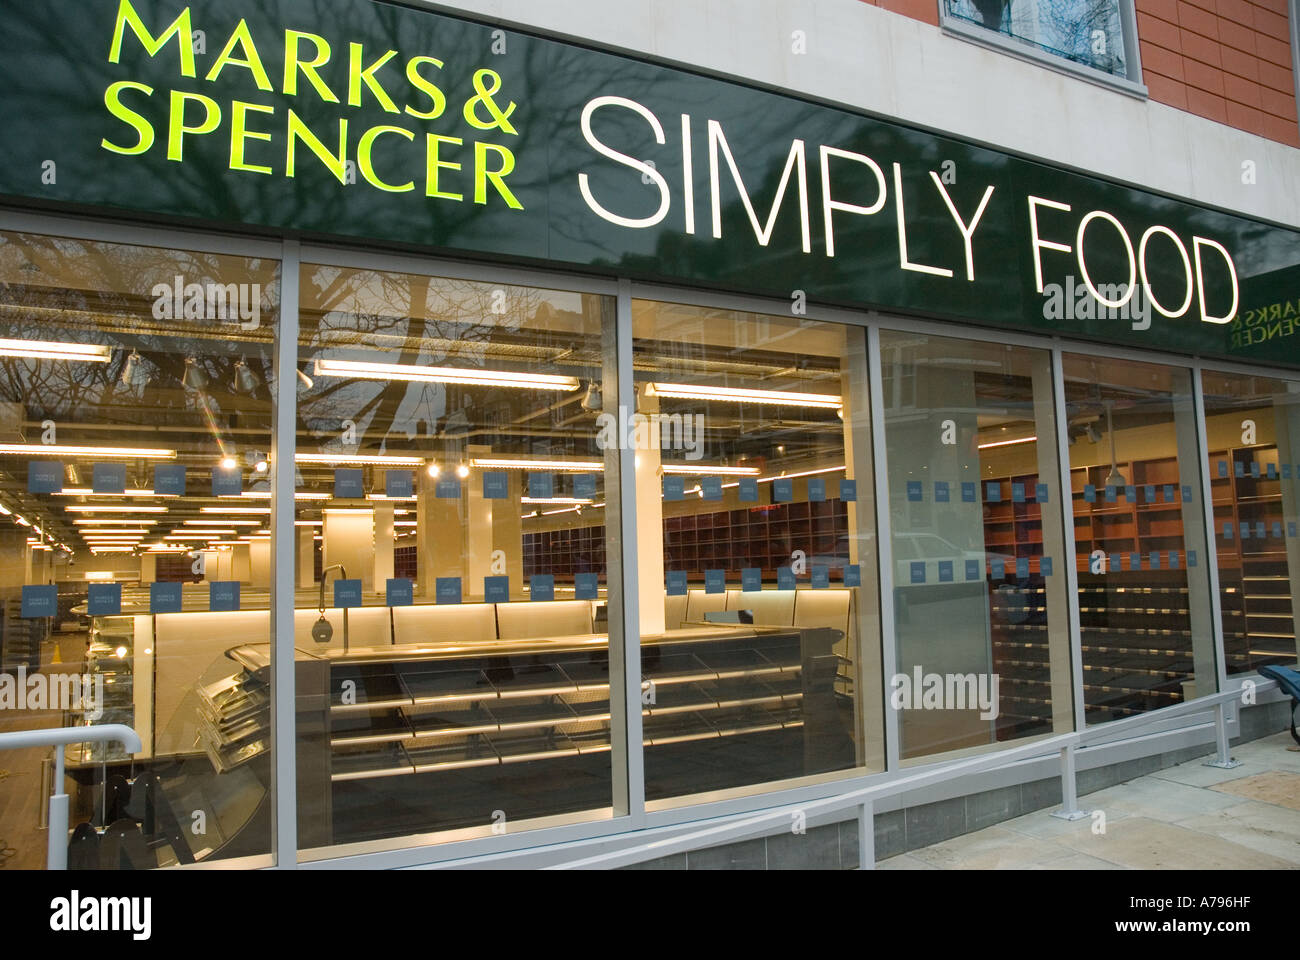 London marks spencer simply food hi-res stock photography and images - Alamy